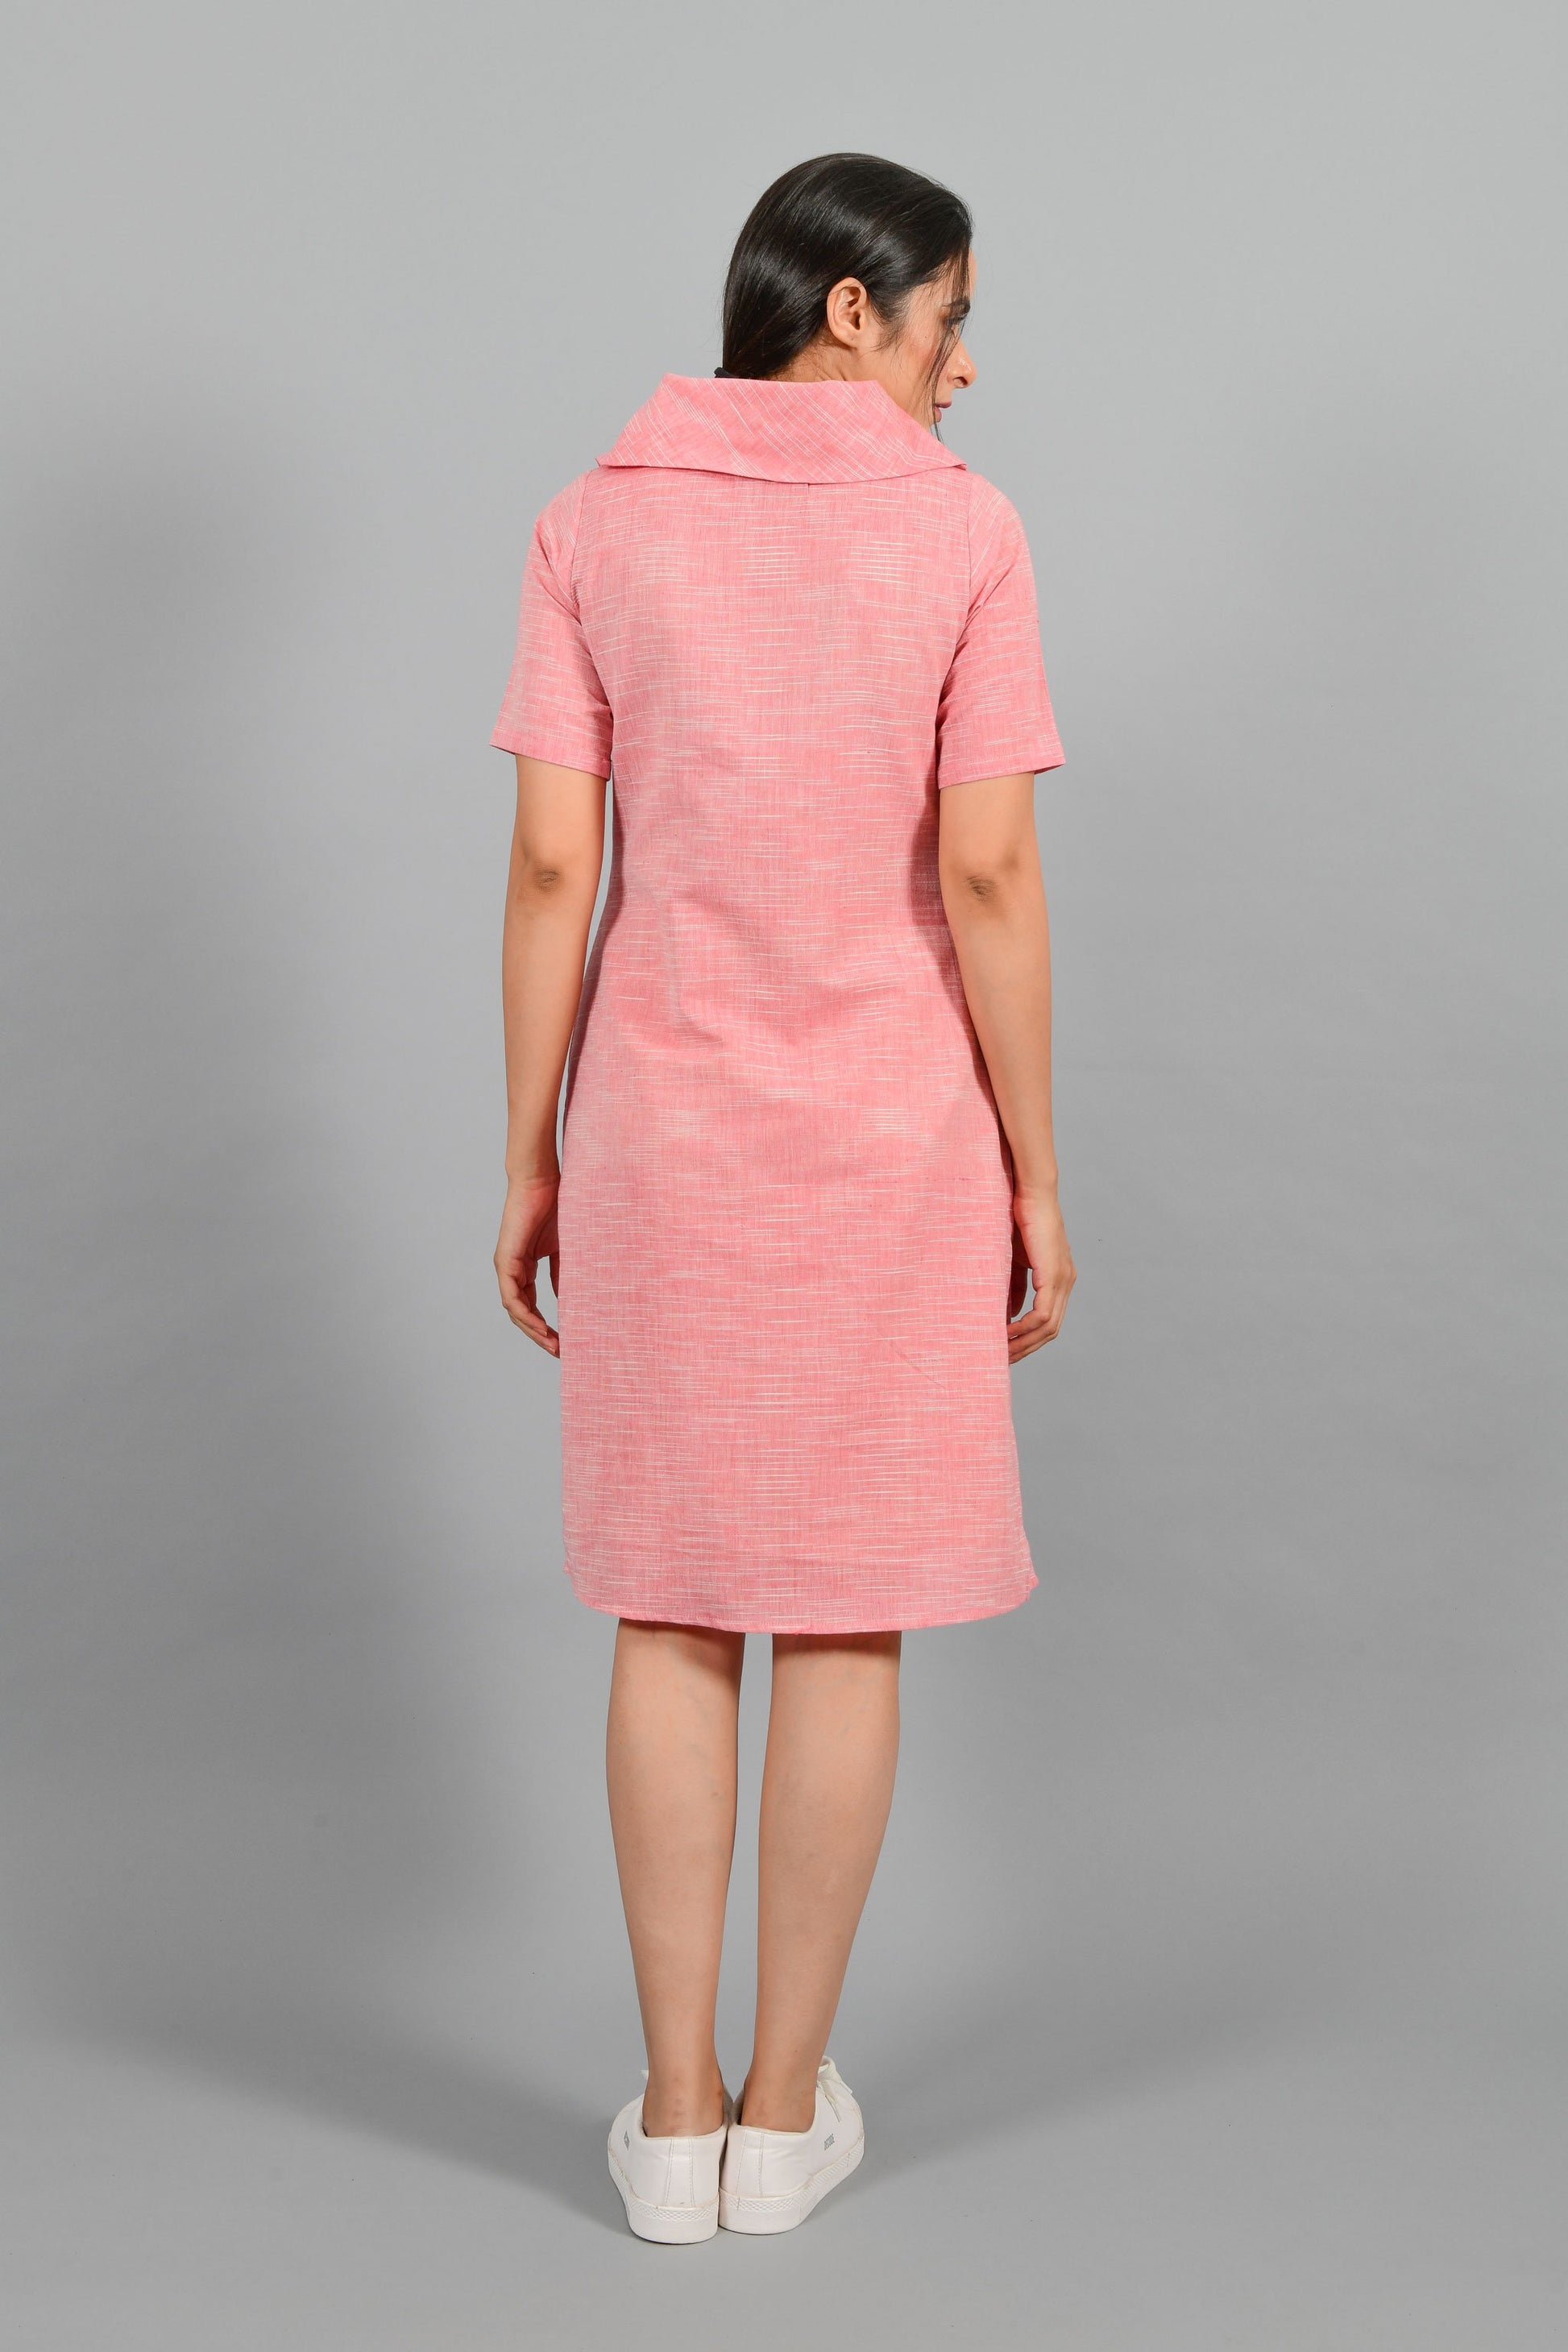 Back pose of an Indian female womenswear fashion model in a Pink and White space dyed cowl neck, elbow sleeve handspun and handwoven khadi cotton dress by Cotton Rack.